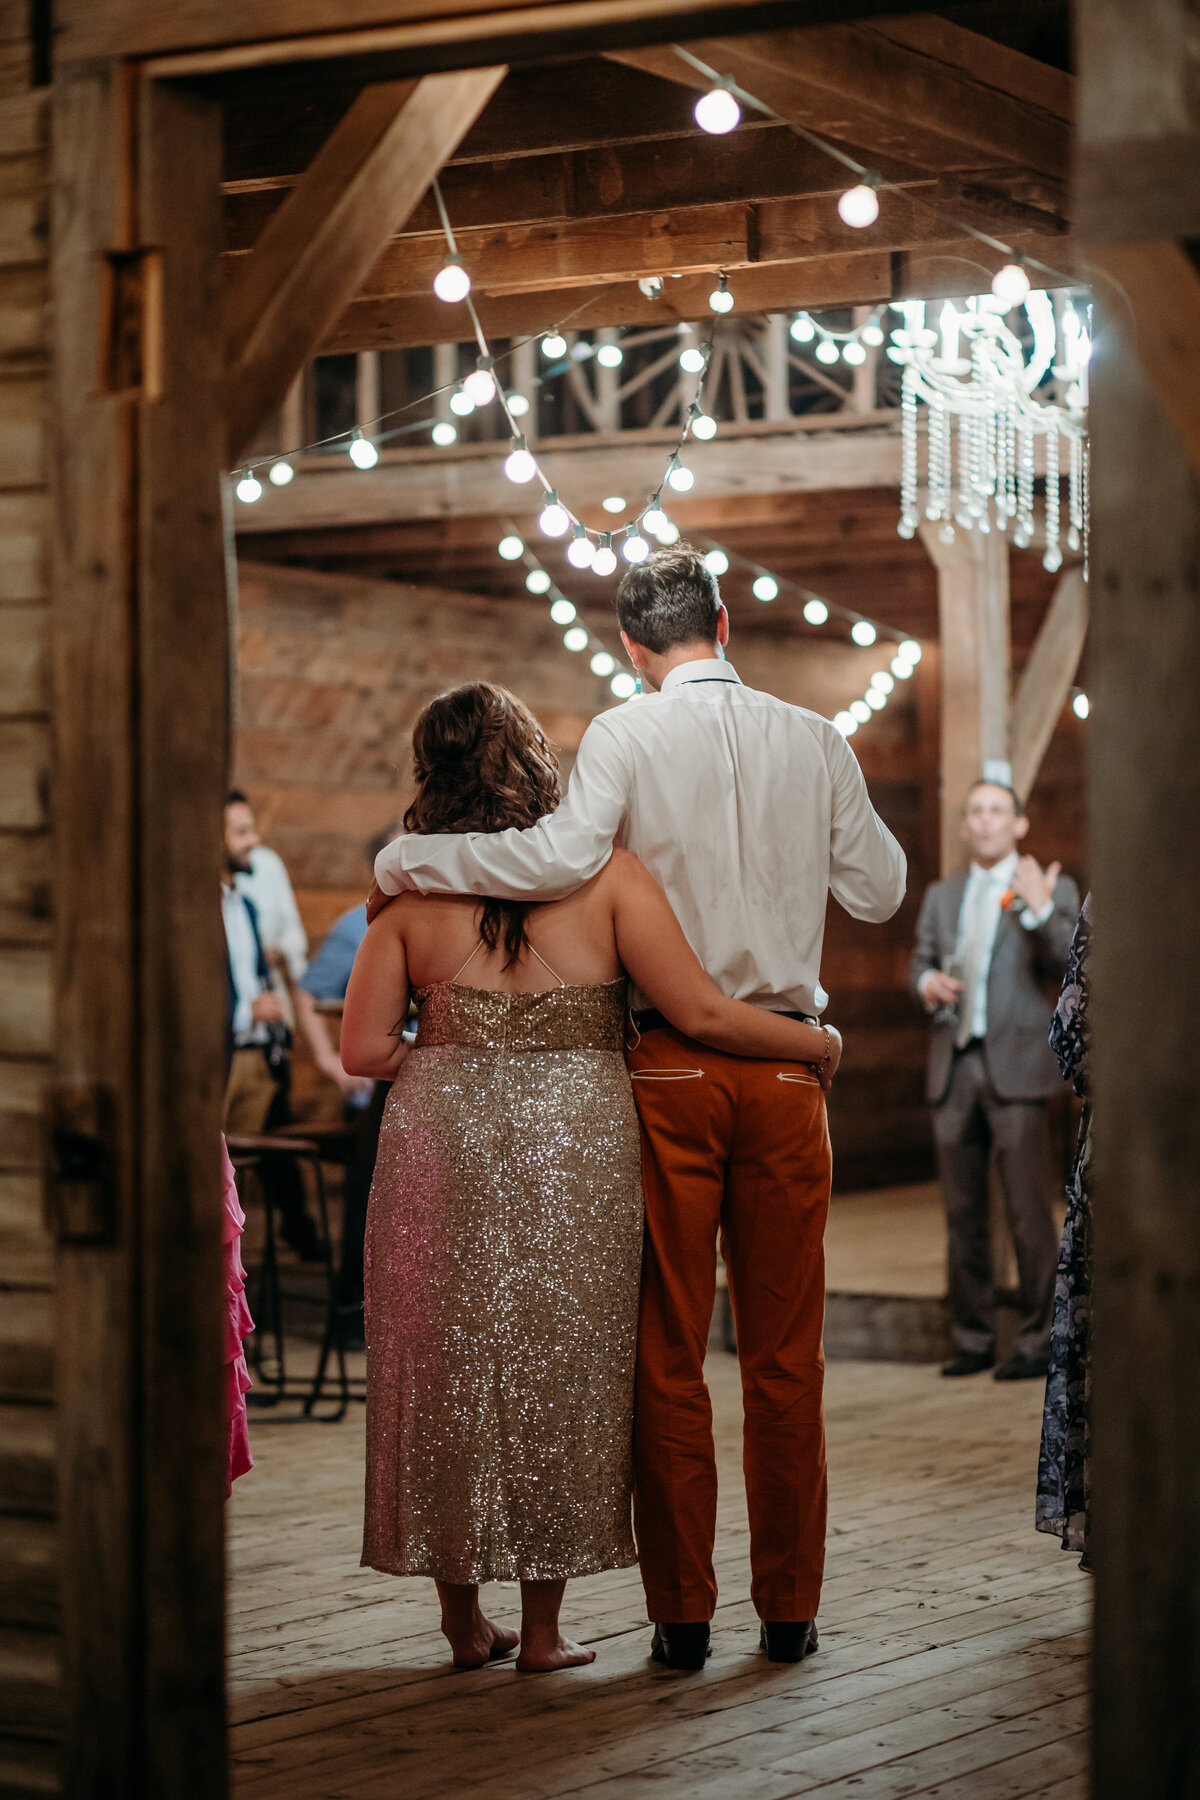 Couple walking arm in arm into a rustic barn adorned with string lights, viewed from behind